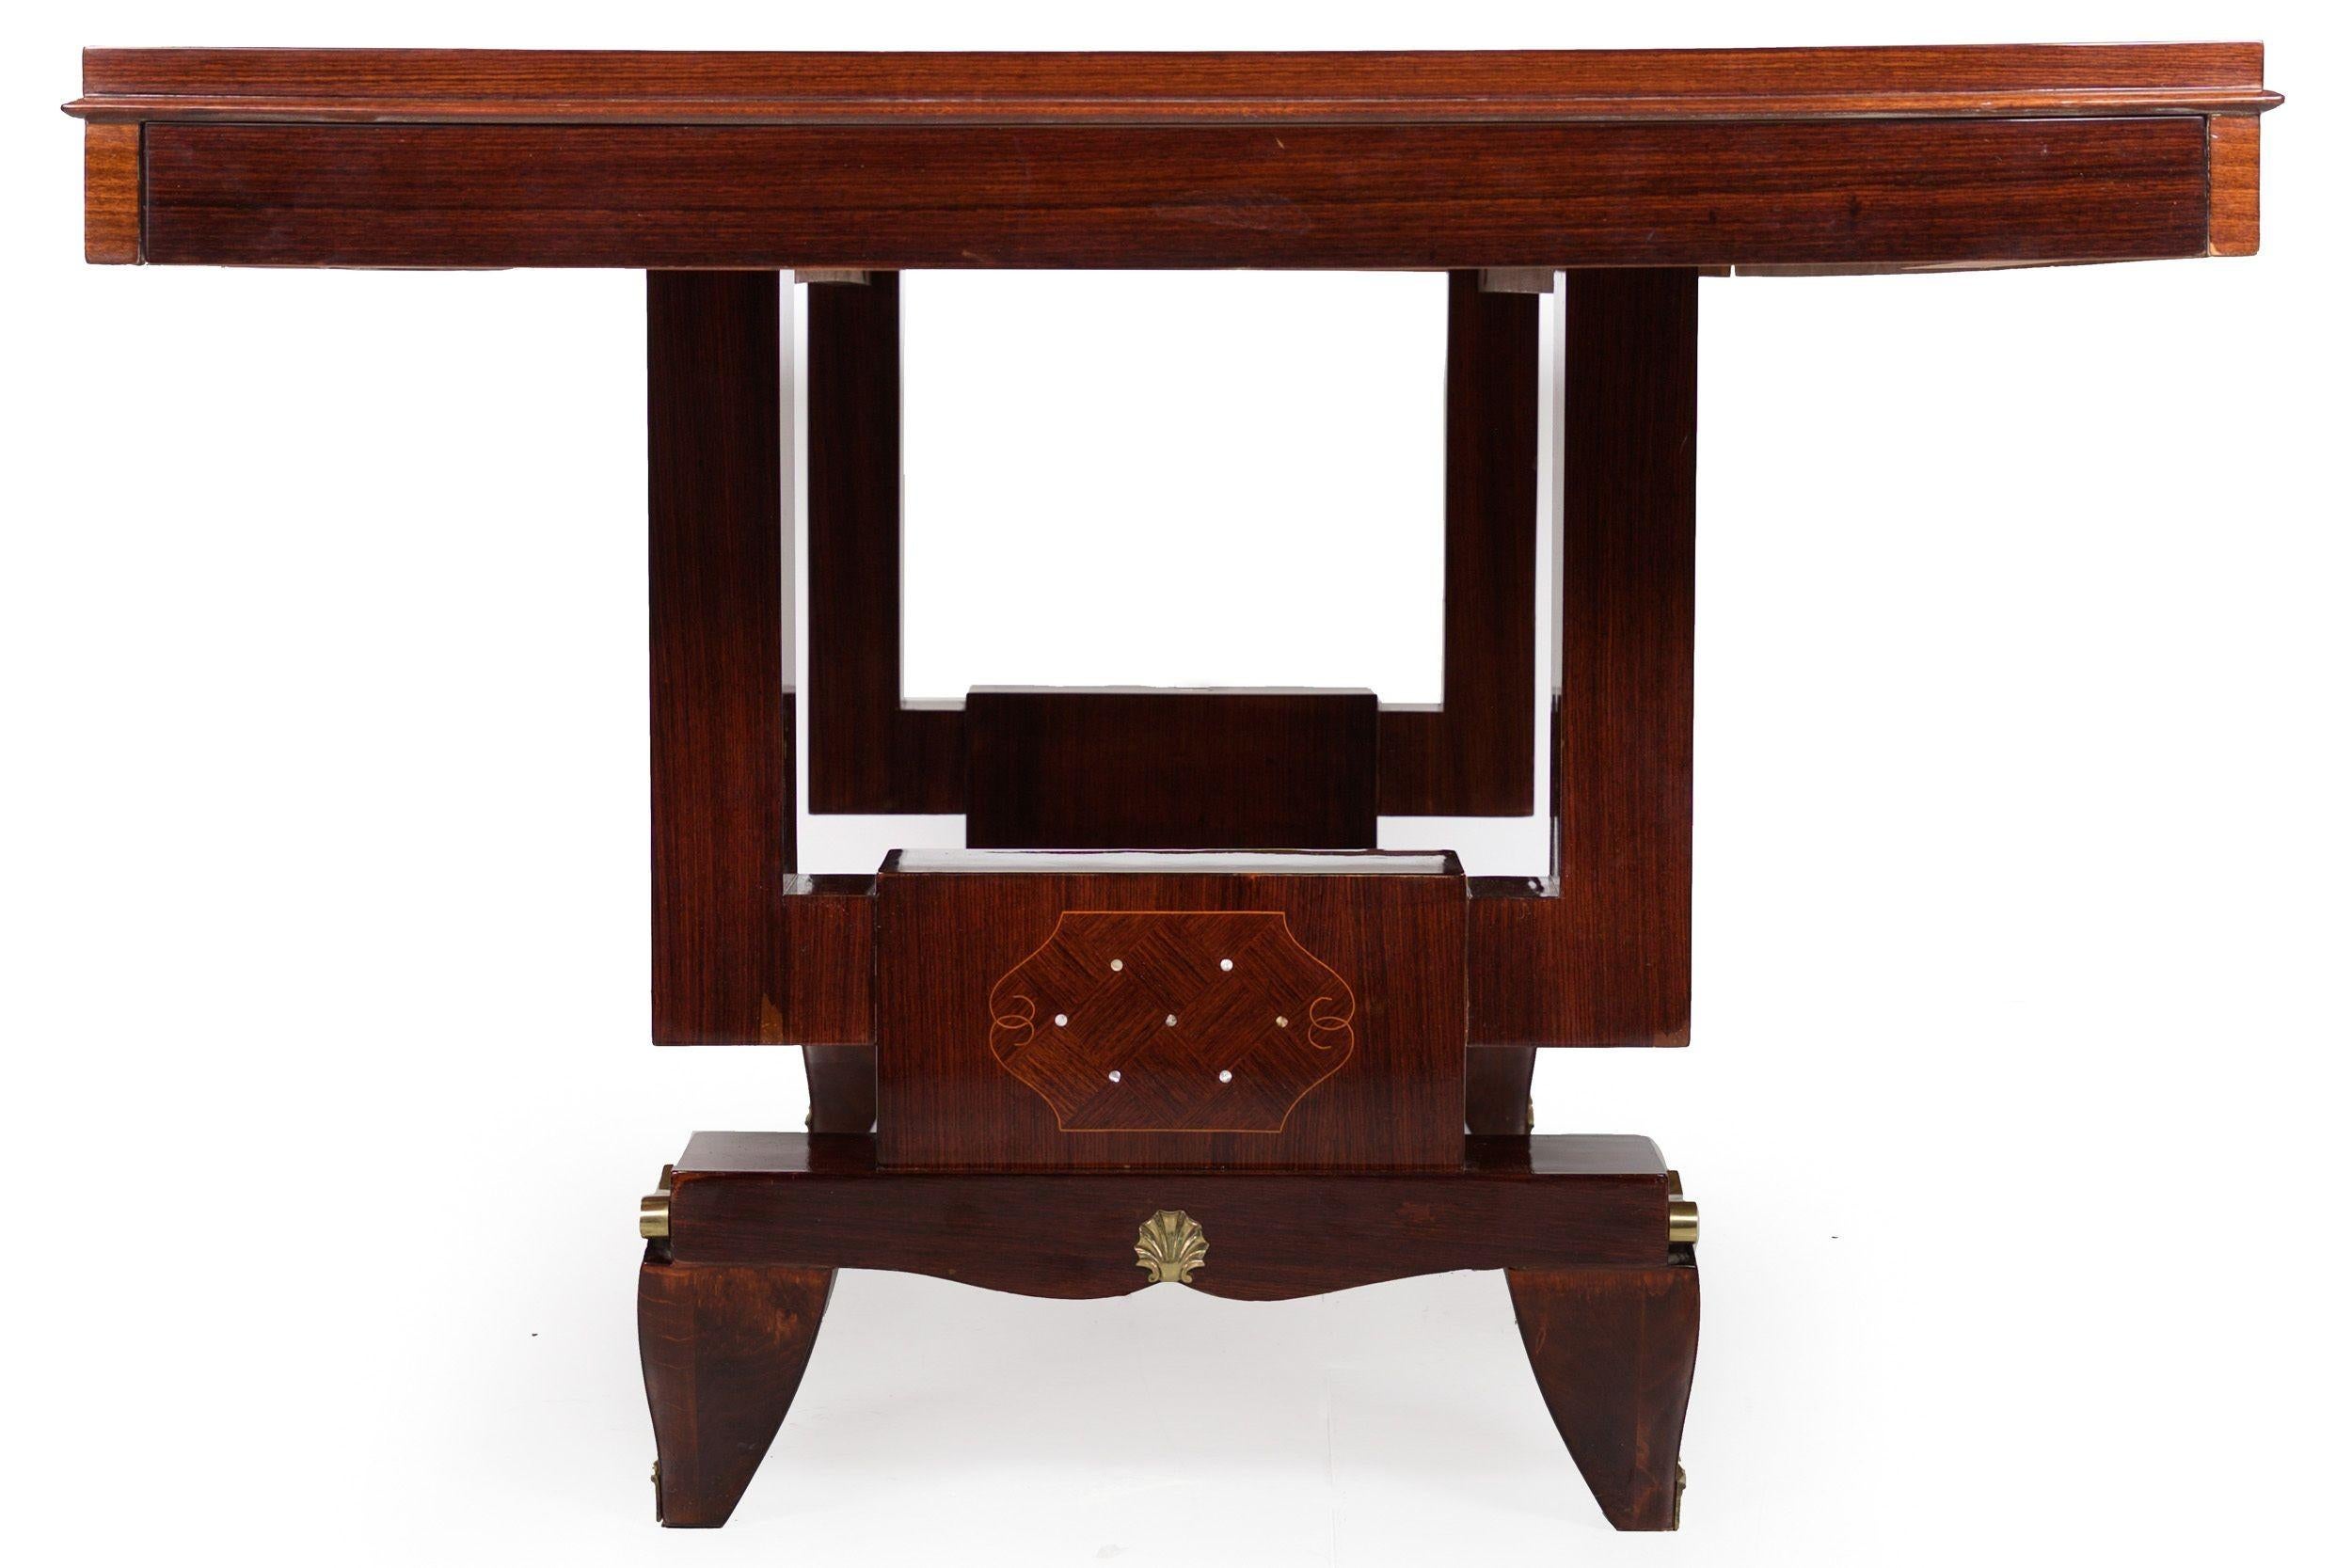 French Art Deco Inlaid Mother-of-Pearl Rosewood Dining Table, circa 1940s For Sale 12